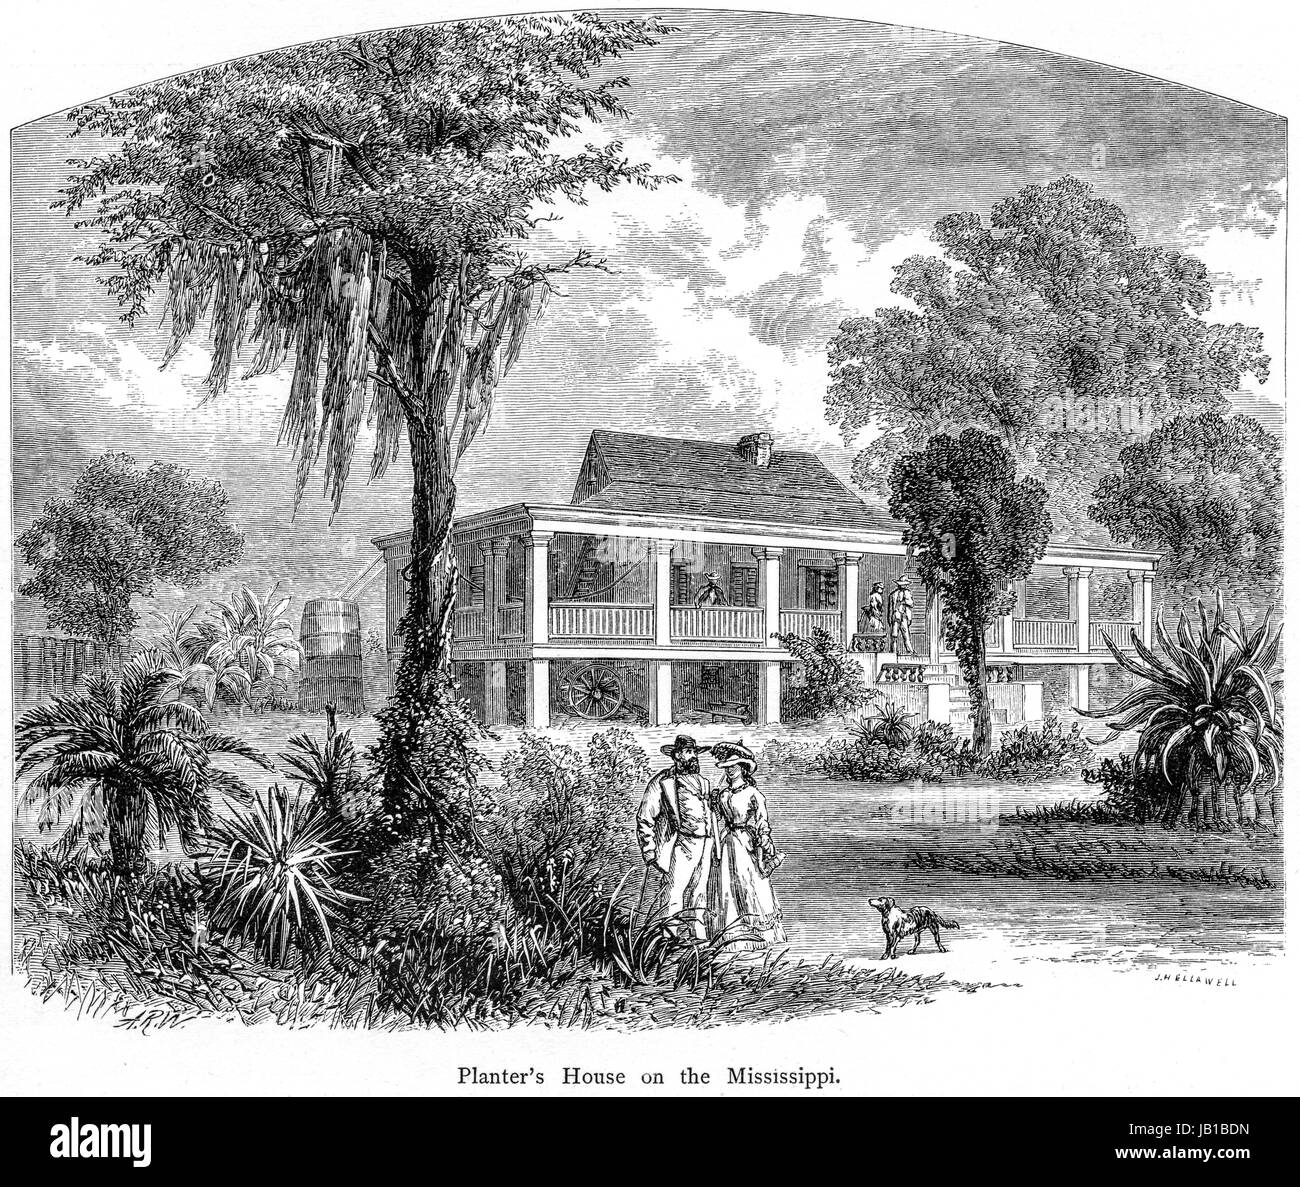 An engraving of a Planters House on the Mississippi scanned at high resolution from a book printed in 1872.  Believed copyright free. Stock Photo